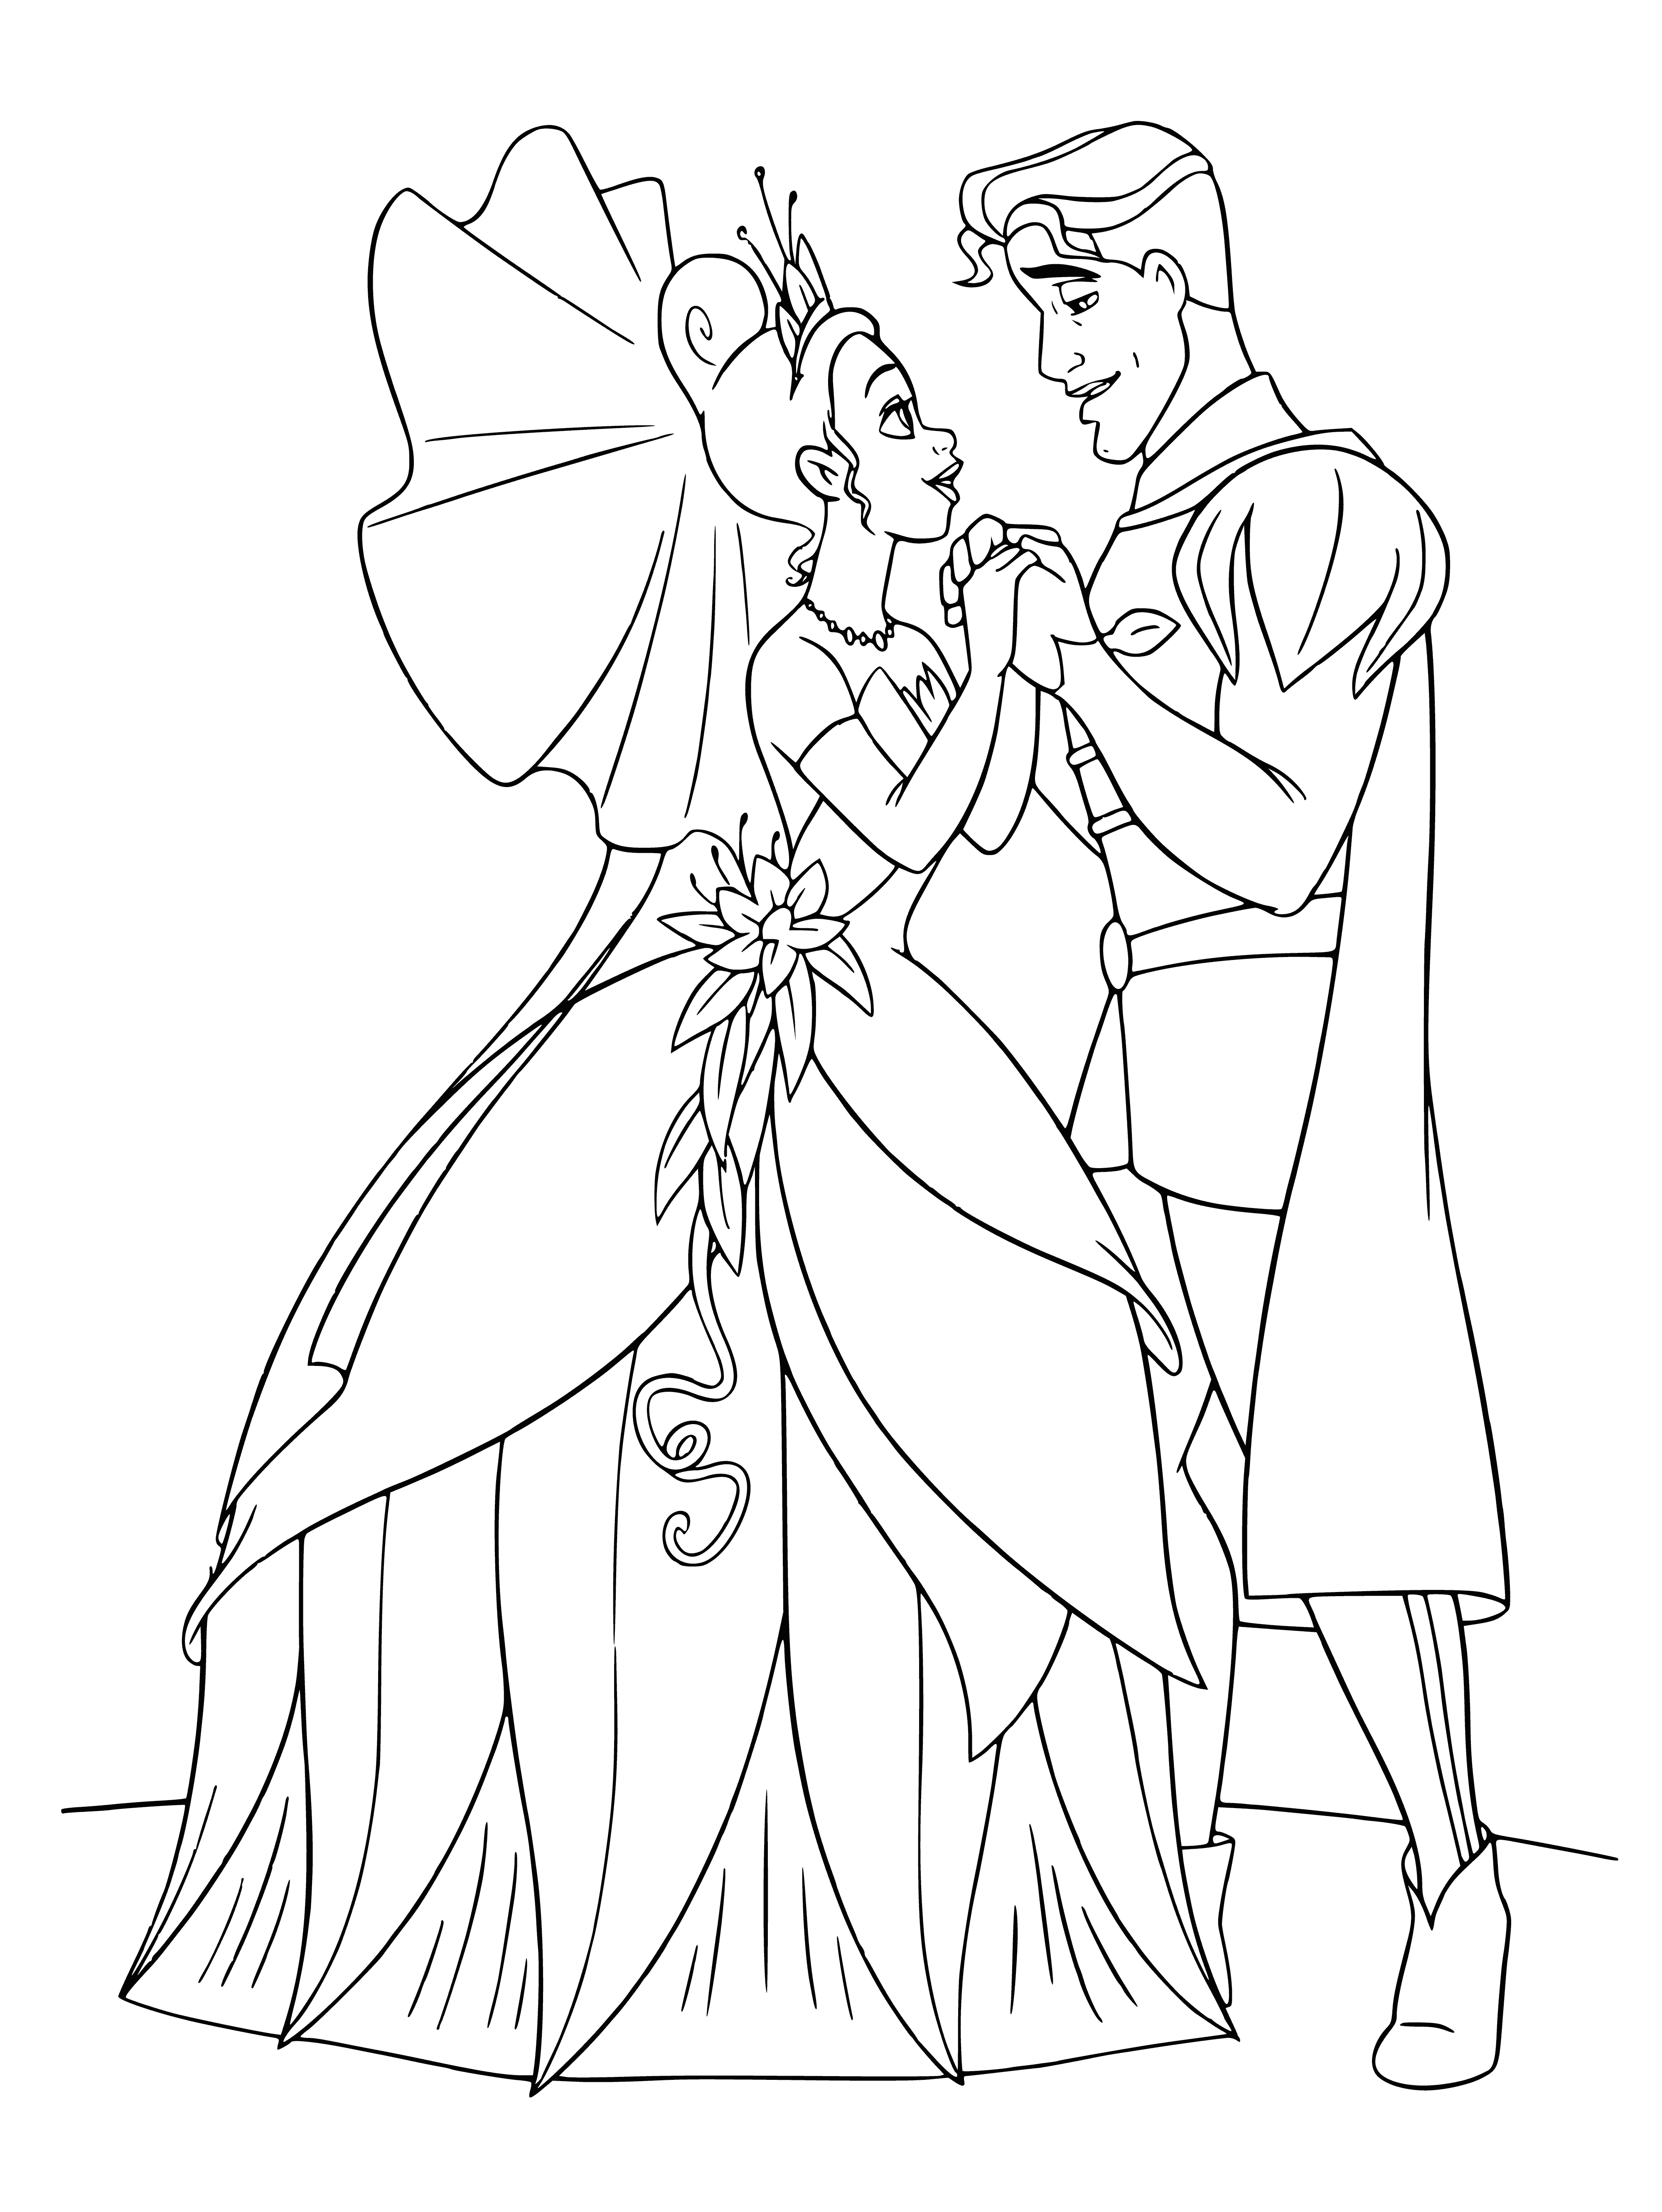 coloring page: Prince & Princess hold hands in front of castle-like building; princess beams at prince.